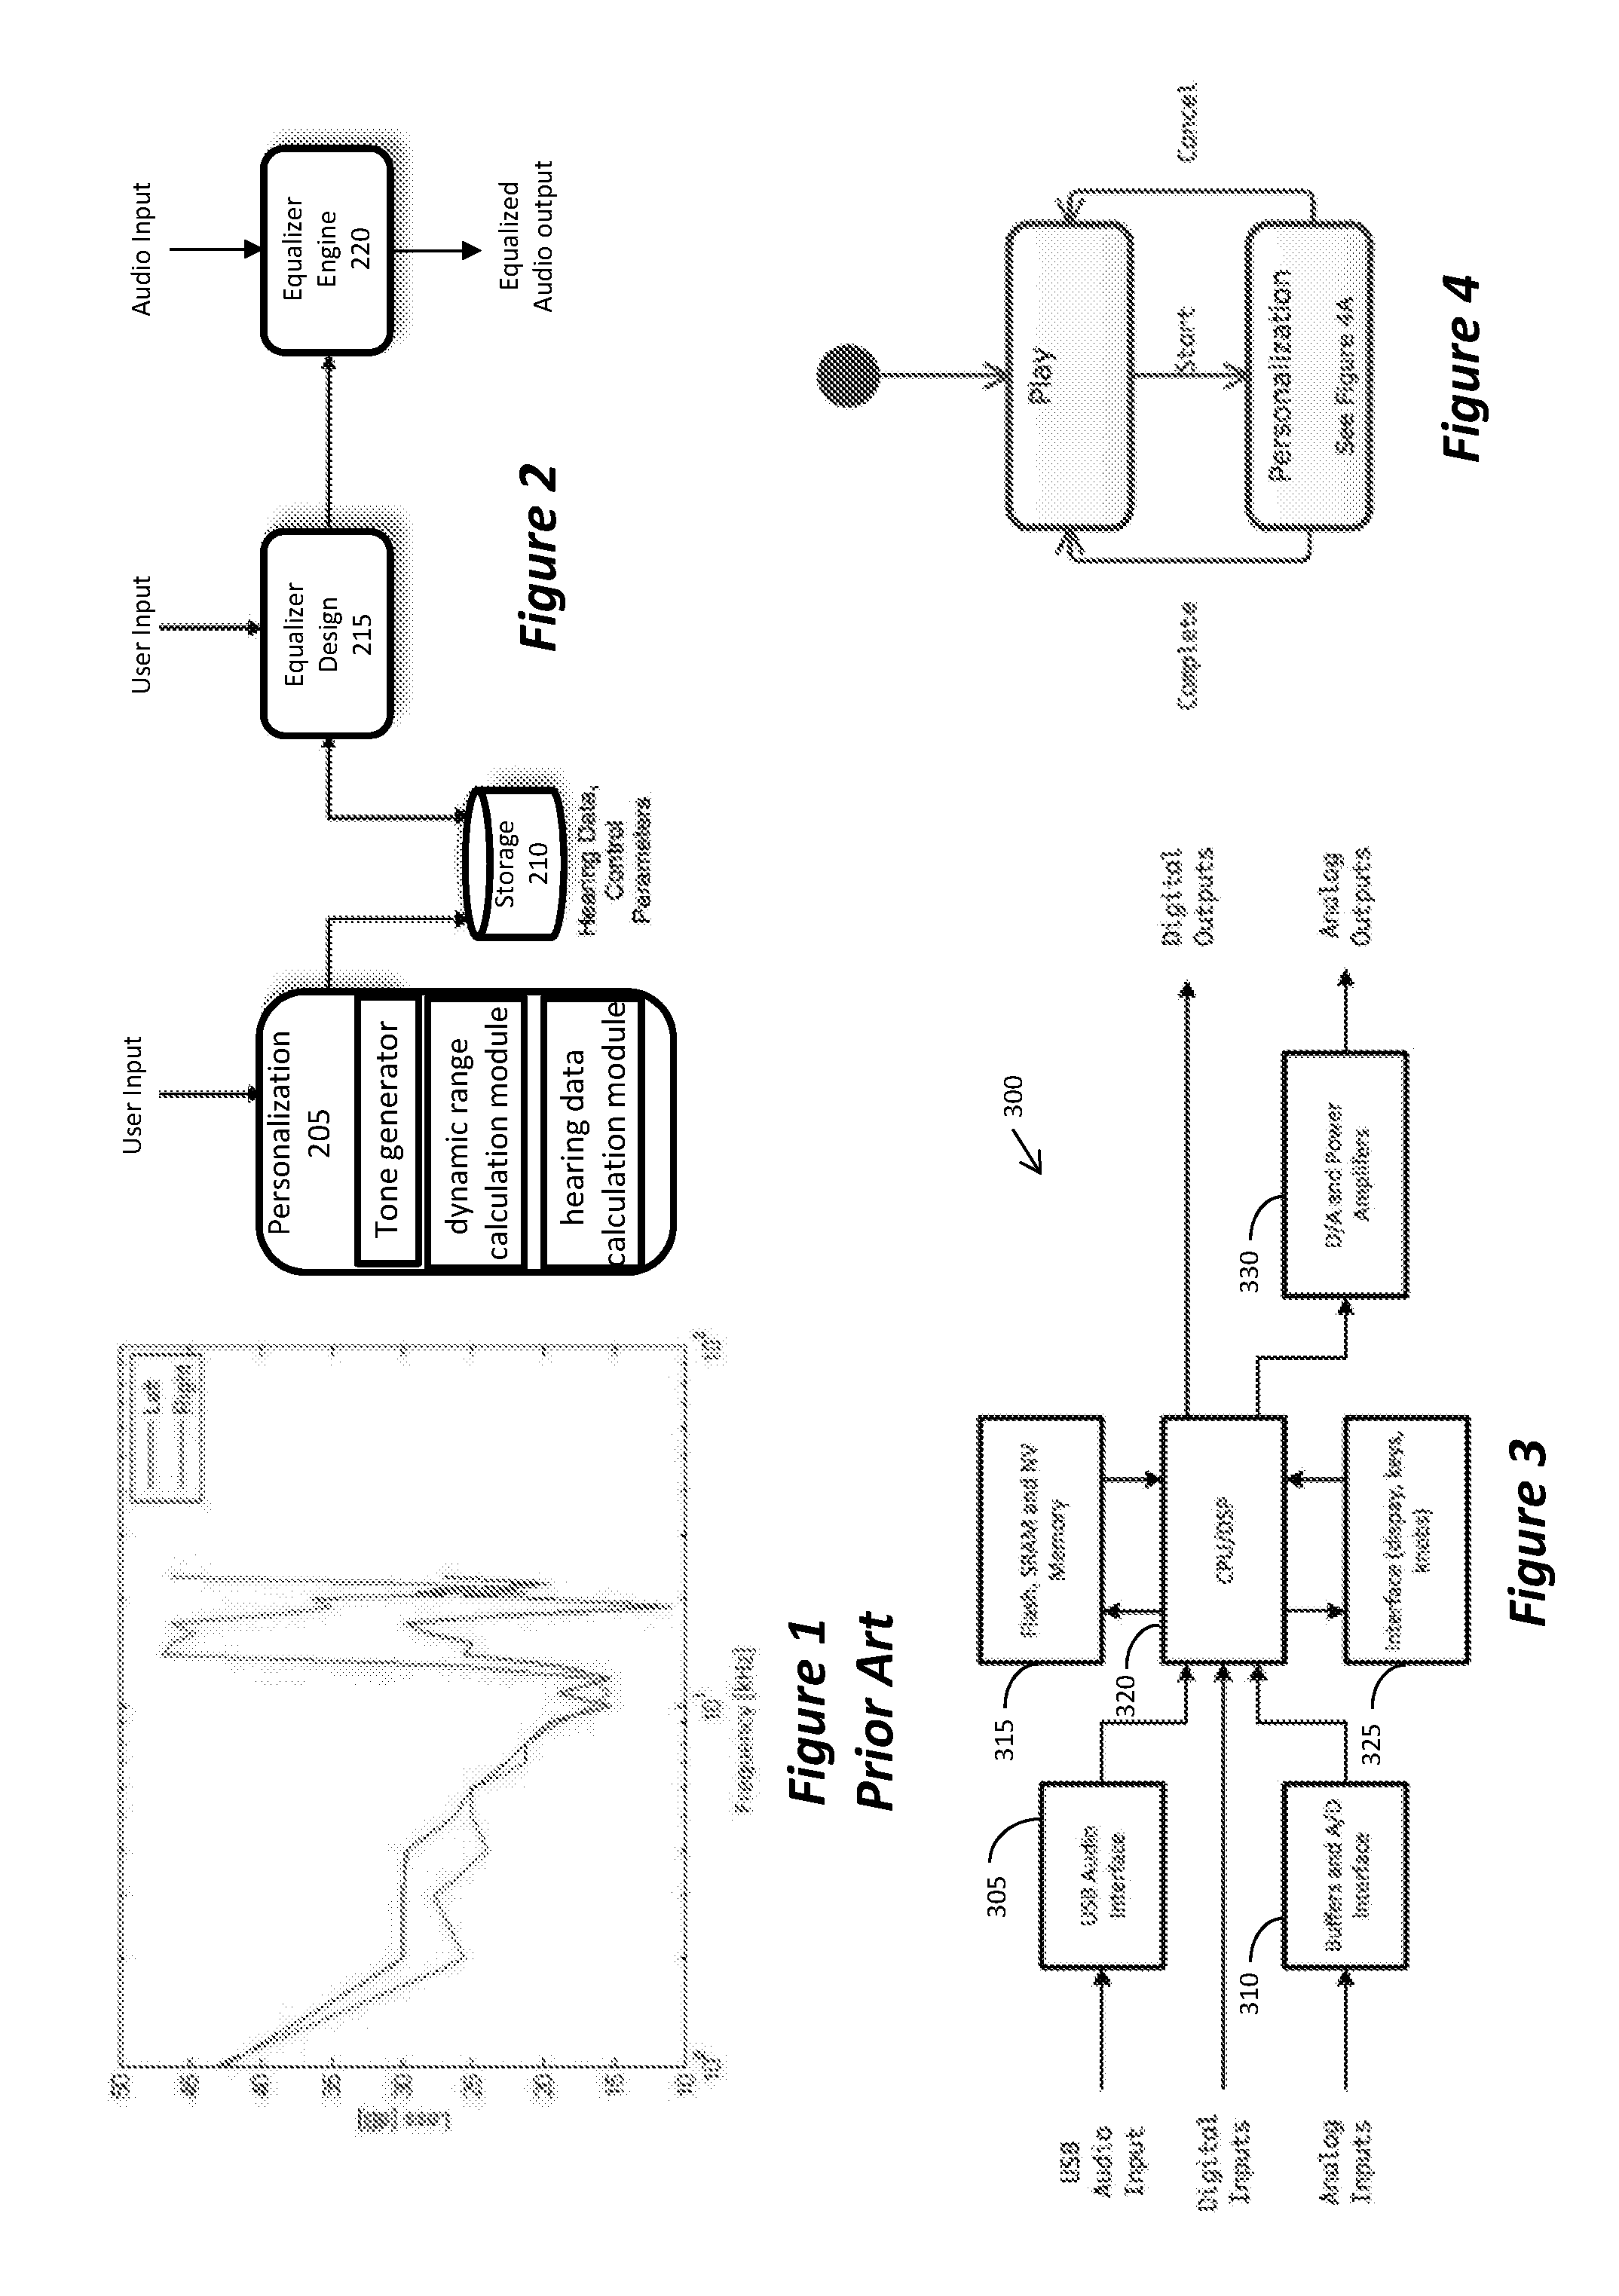 System and method for improved audio perception